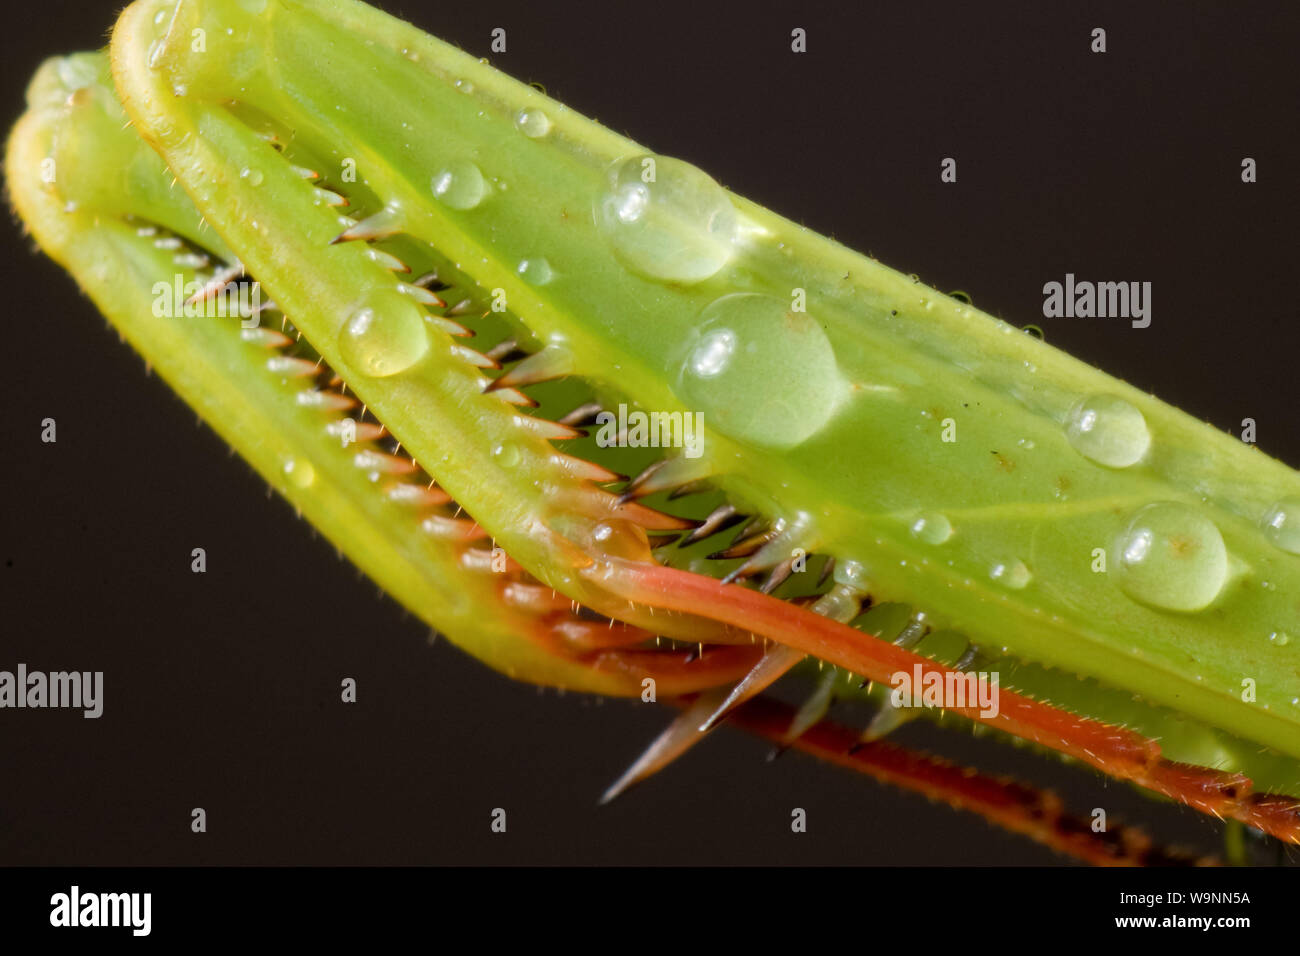 Close-up of a green praying mantis, insect macrophotography showing the raptorial legs Stock Photo